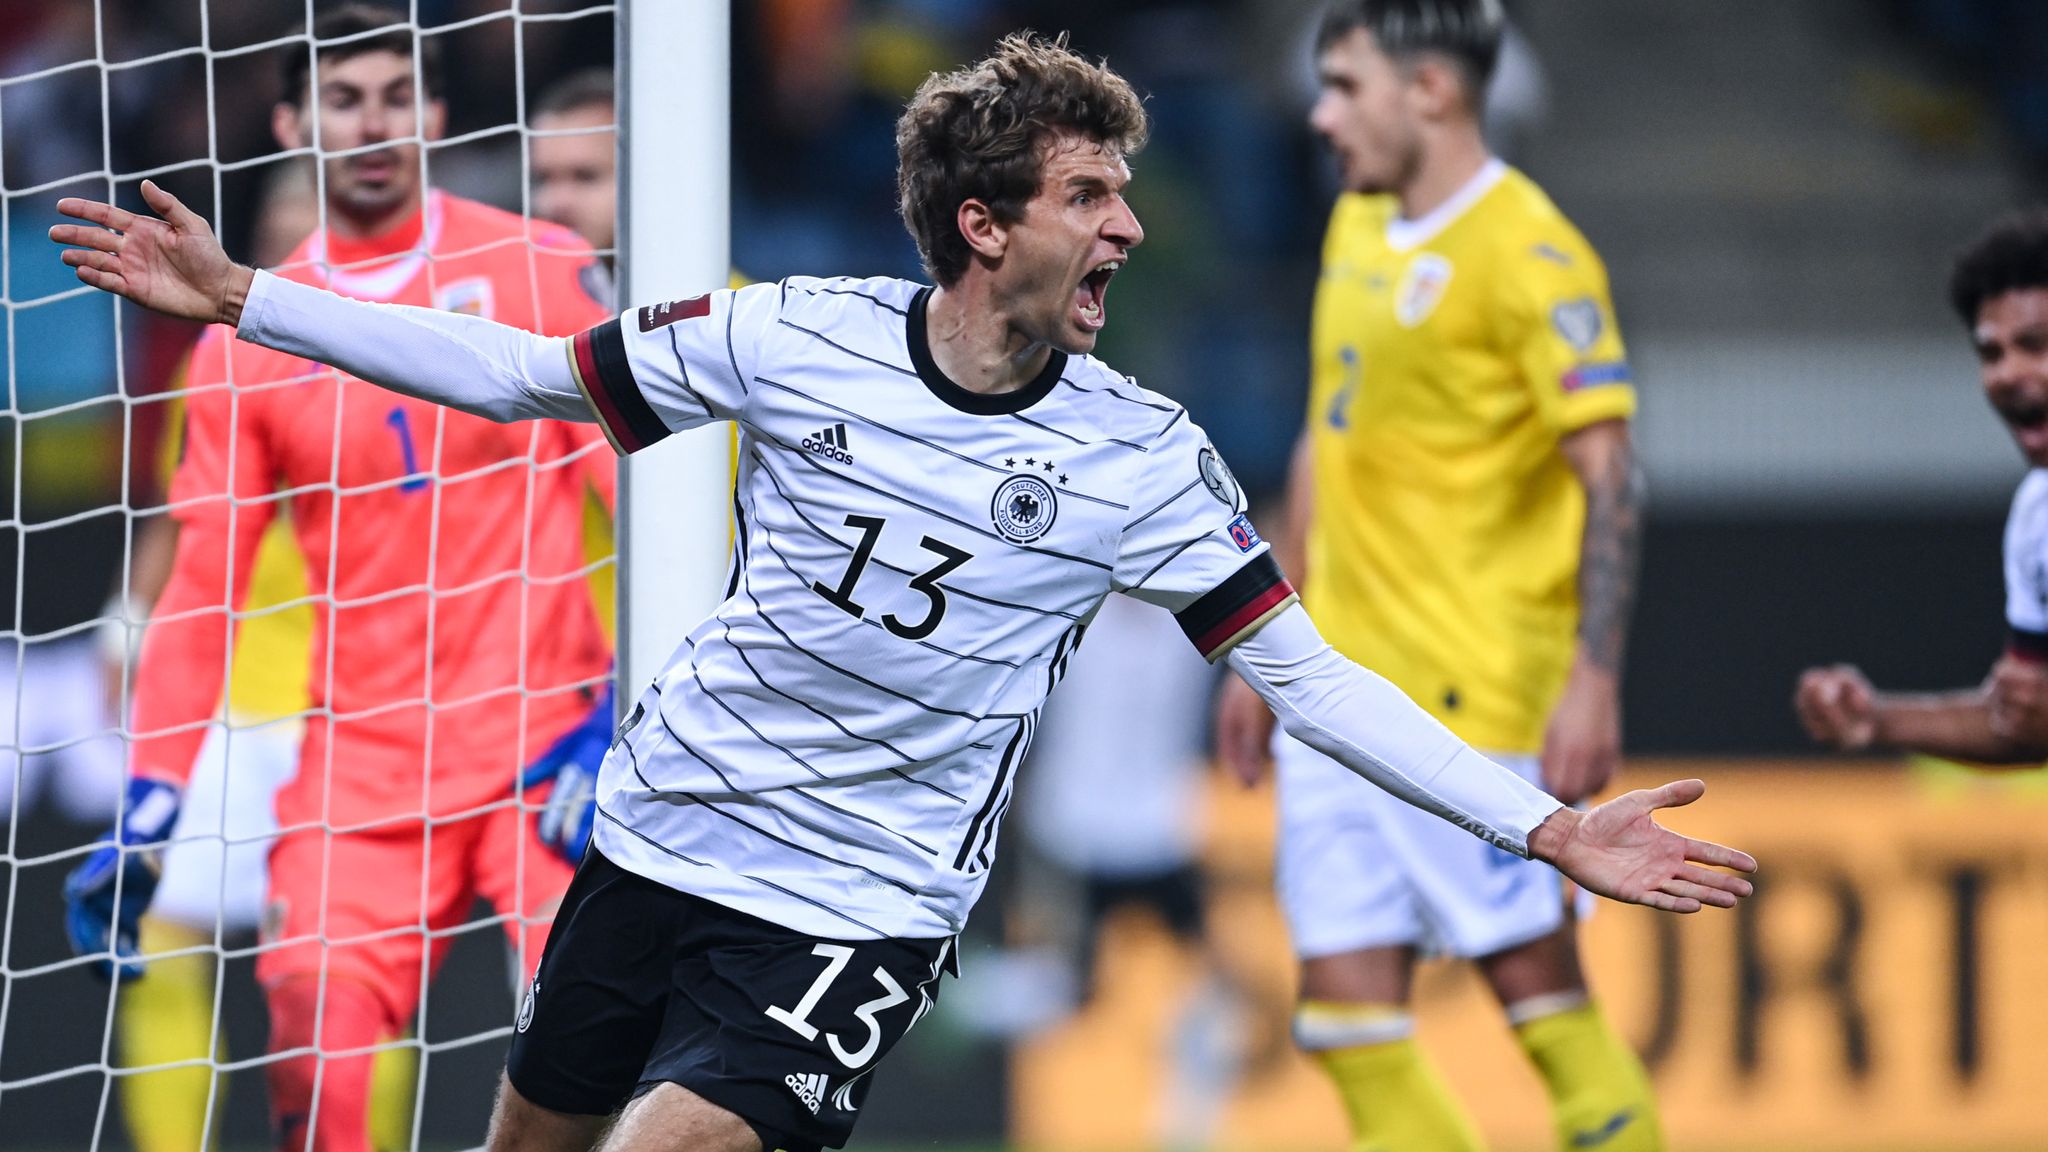 World Cup qualifiers round up: Thomas Muller saves Germany, Netherlands edge past Latvia